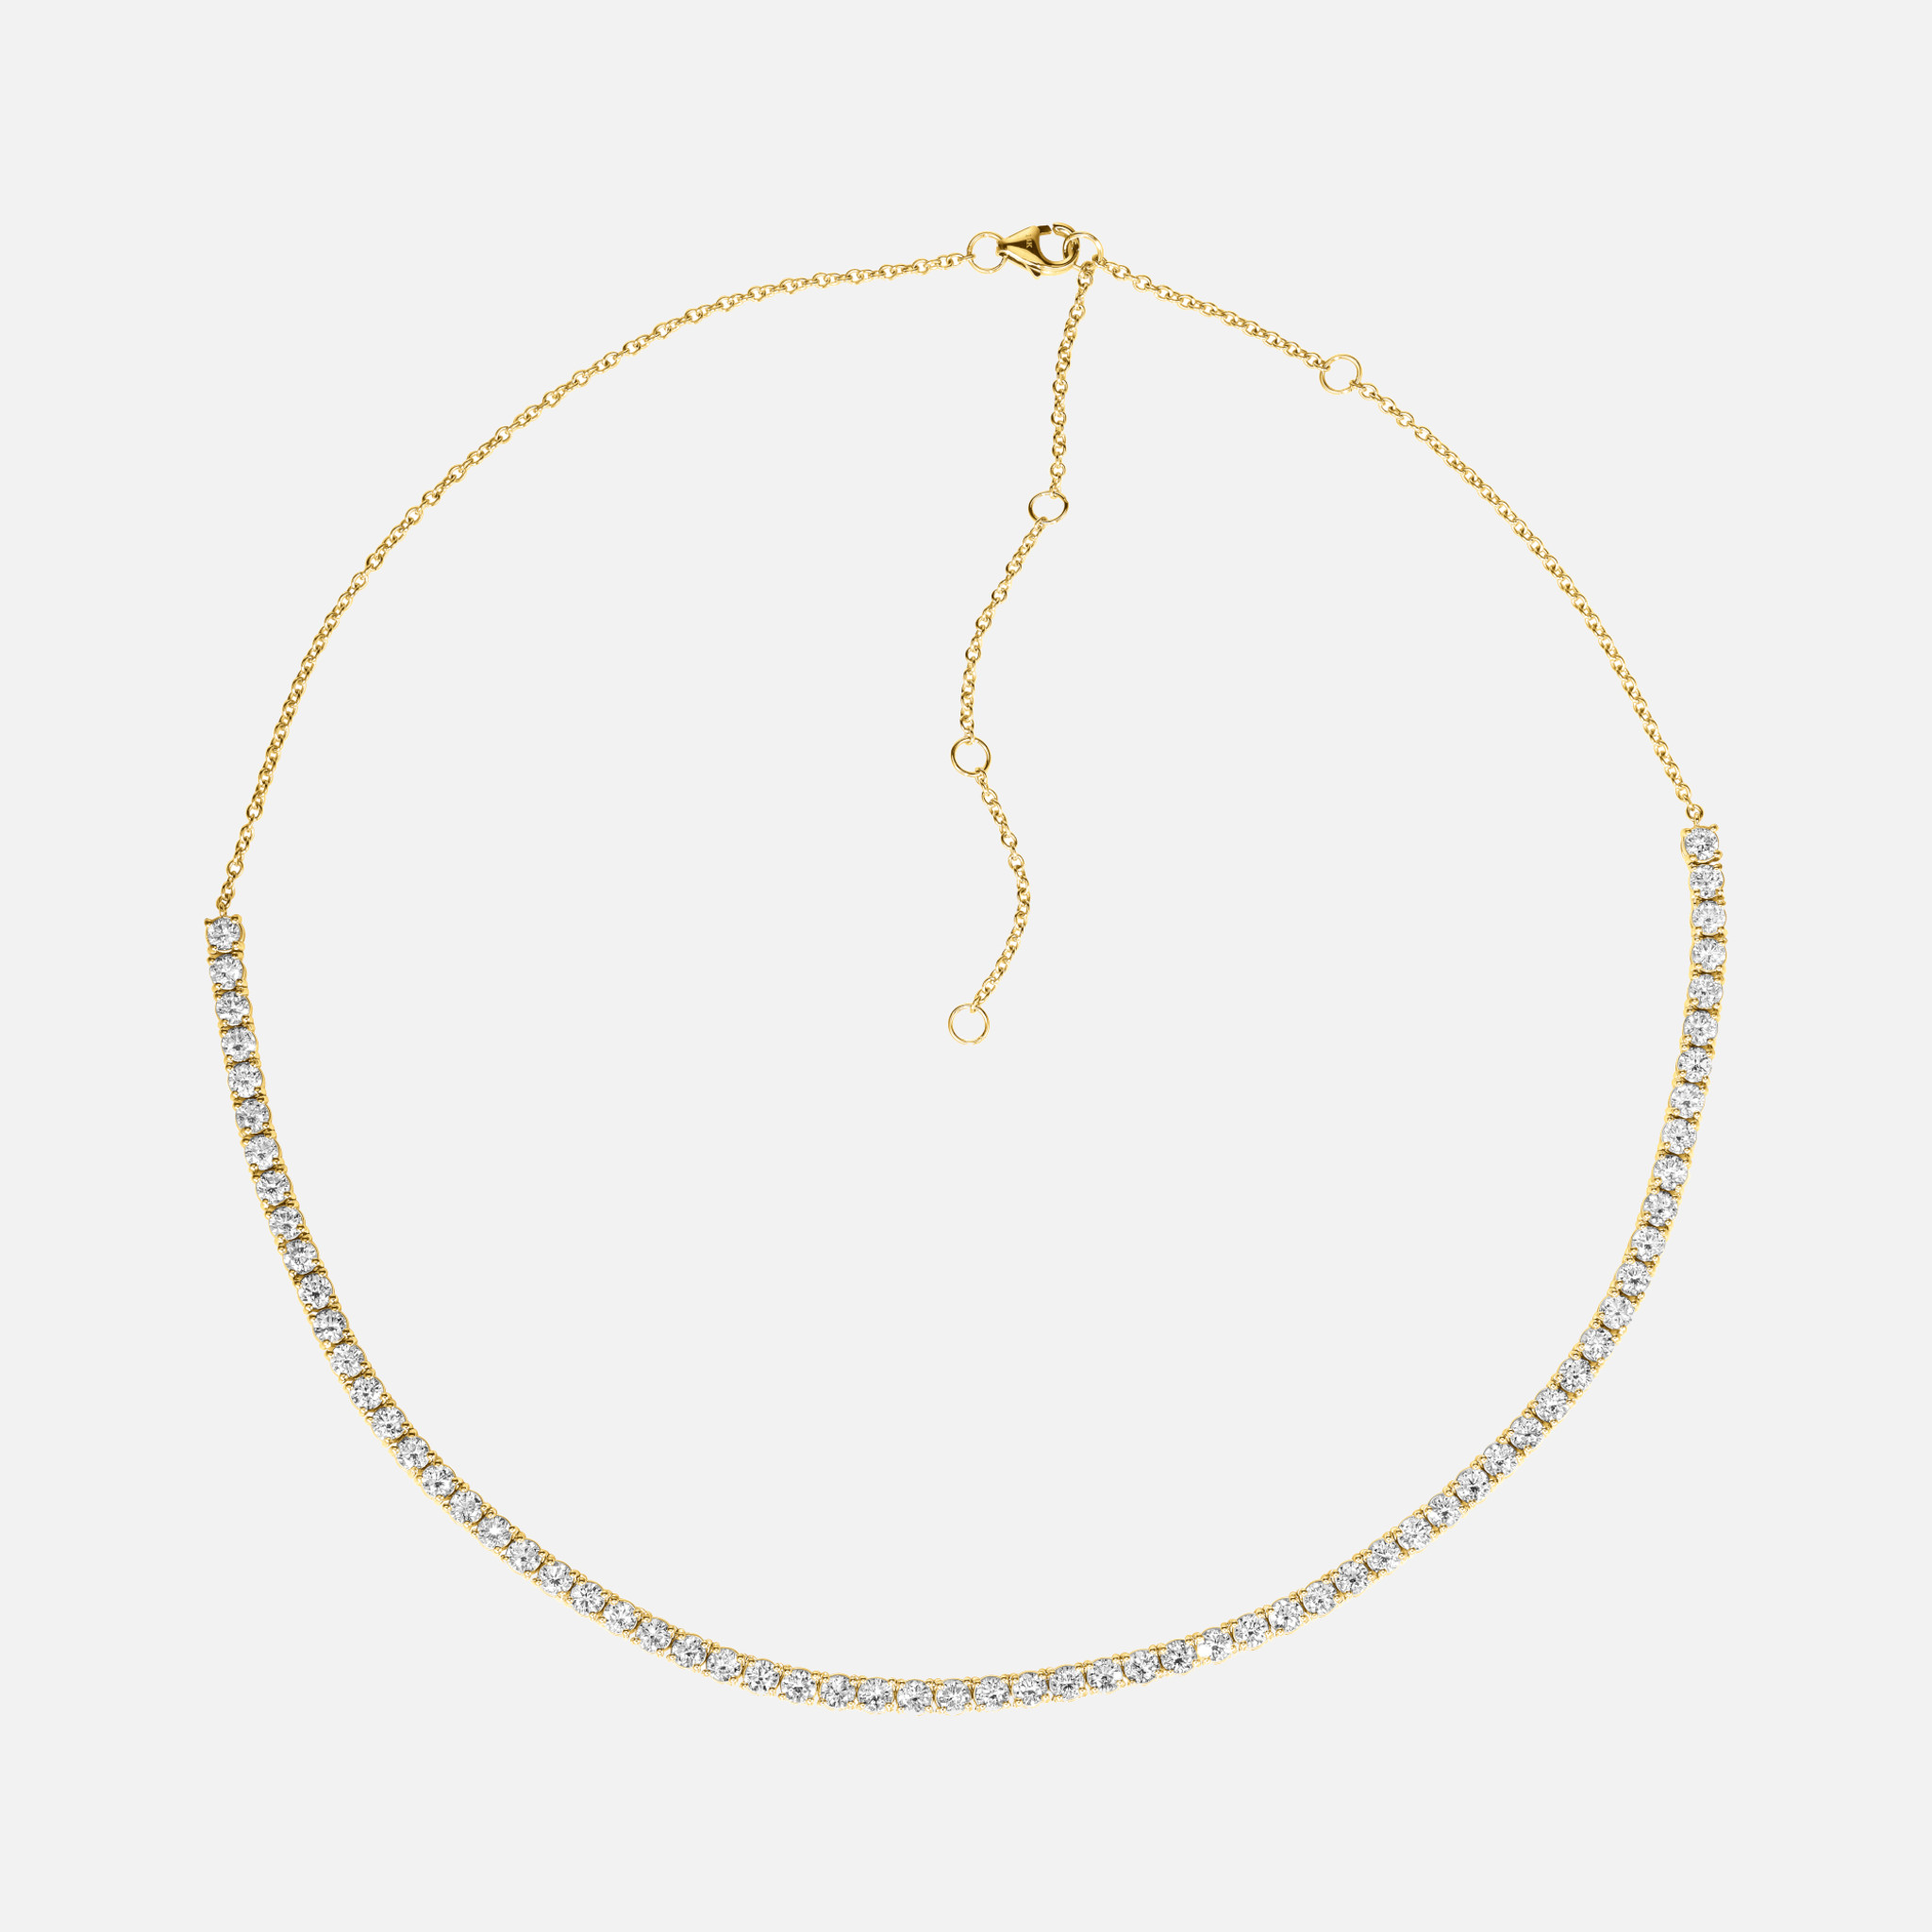 A stunning diamond tennis chain necklace in sleek white gold, featuring an extendable cable chain with .92 carats of brilliant cut white diamonds.